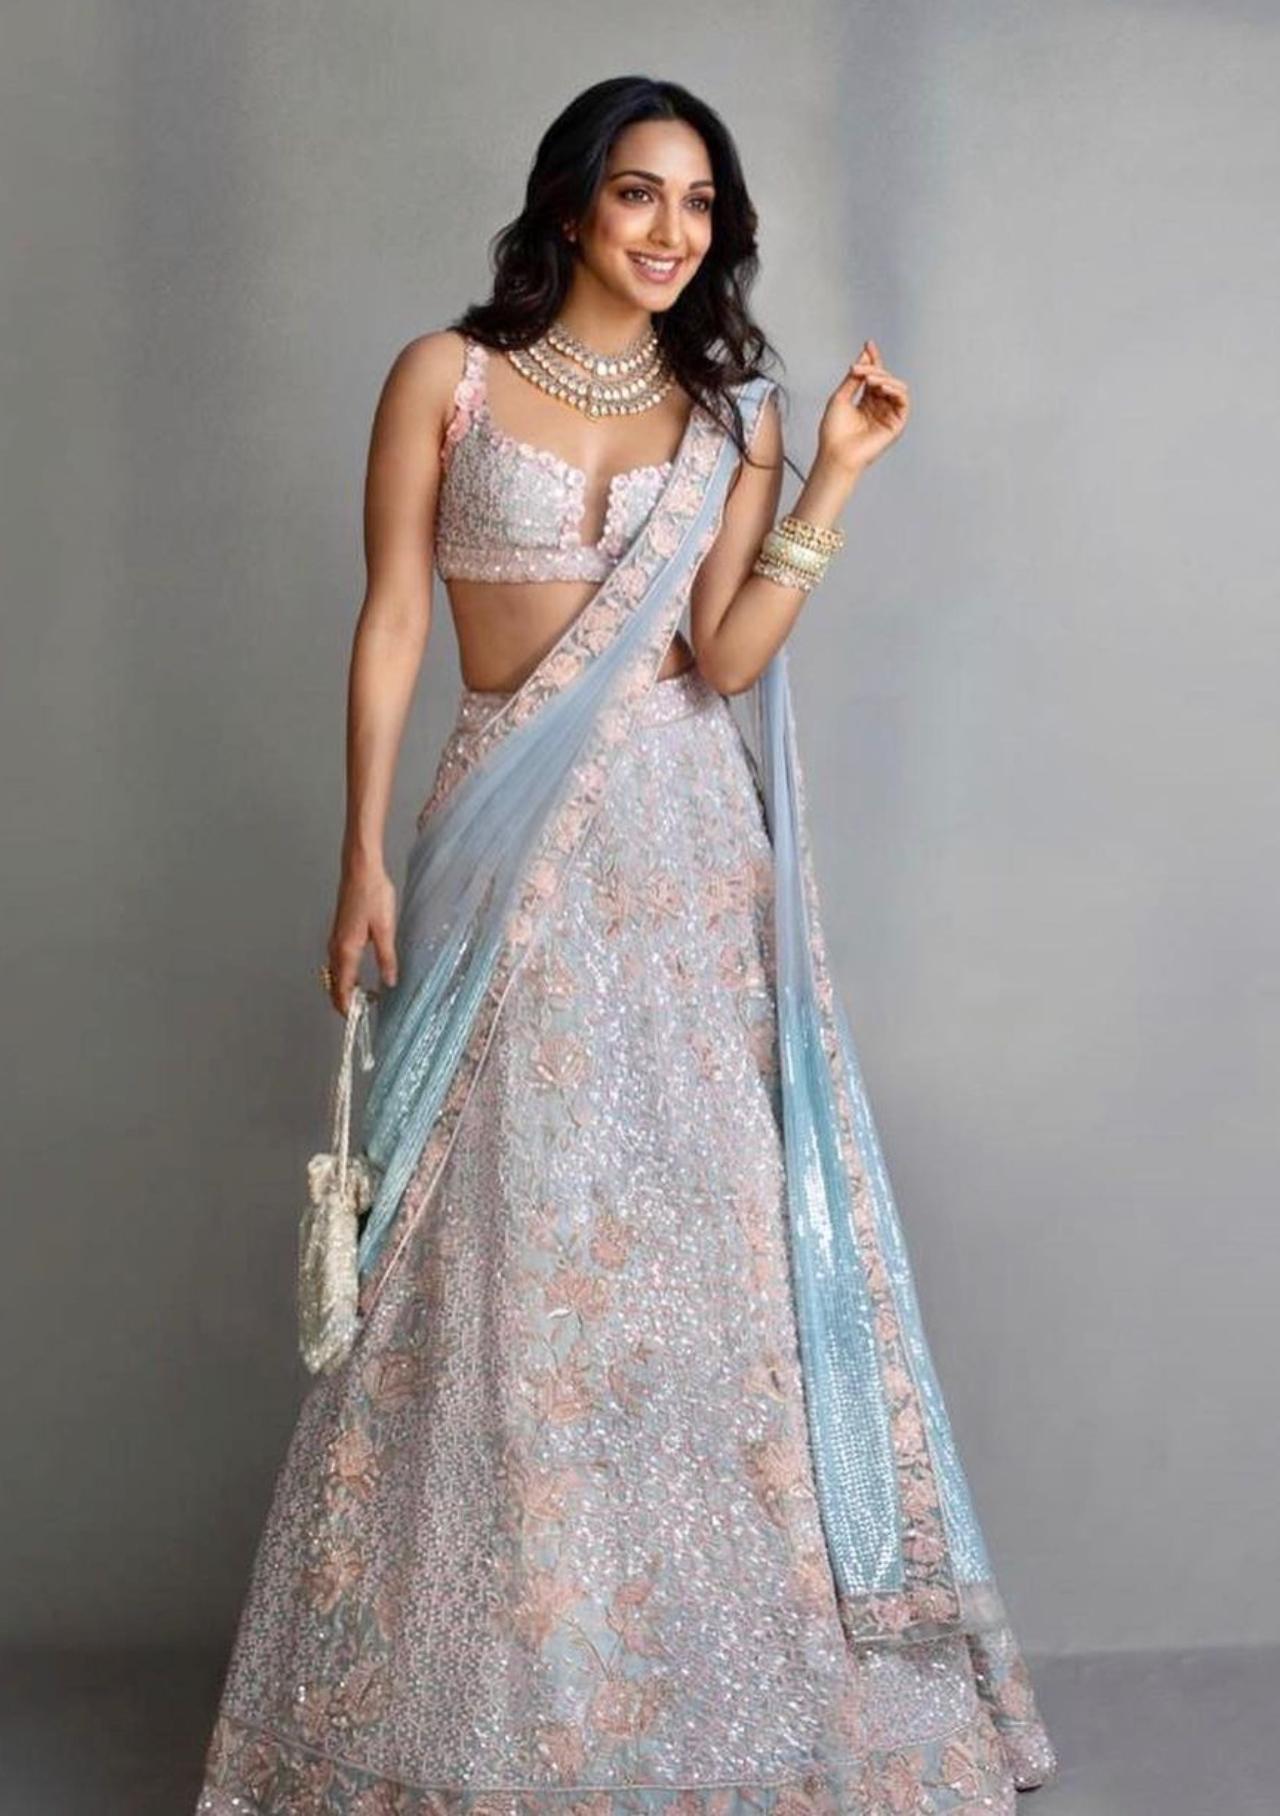 Beauty in Blue
Keeping up with her fetish for blingy and shimmery lehengas, the 'Bijlee Bijlee' hitmaker stole thunder when she rocked a pastel blue embellished lehenga for a star-studded wedding in Mumbai. A masterpiece by Manish Malhotra, Kiara's pastel blue lehenga had a sleeveless peach embroidered blouse with 3D floral patches. The combination of blue and peach made her ensemble stand out and enhanced Kiara's beauty and elegance to a whole new level. The dupatta with floral embroidery added subtlety to her extravagant embellished ensemble. To accessories her glamorous wedding look, she opted for three layered necklaces. Kiara ditched earrings and instead stacked up chunky statement kangans. The B-town beauty kept her hair open and paired nude makeup with the elegant outfit. 
 